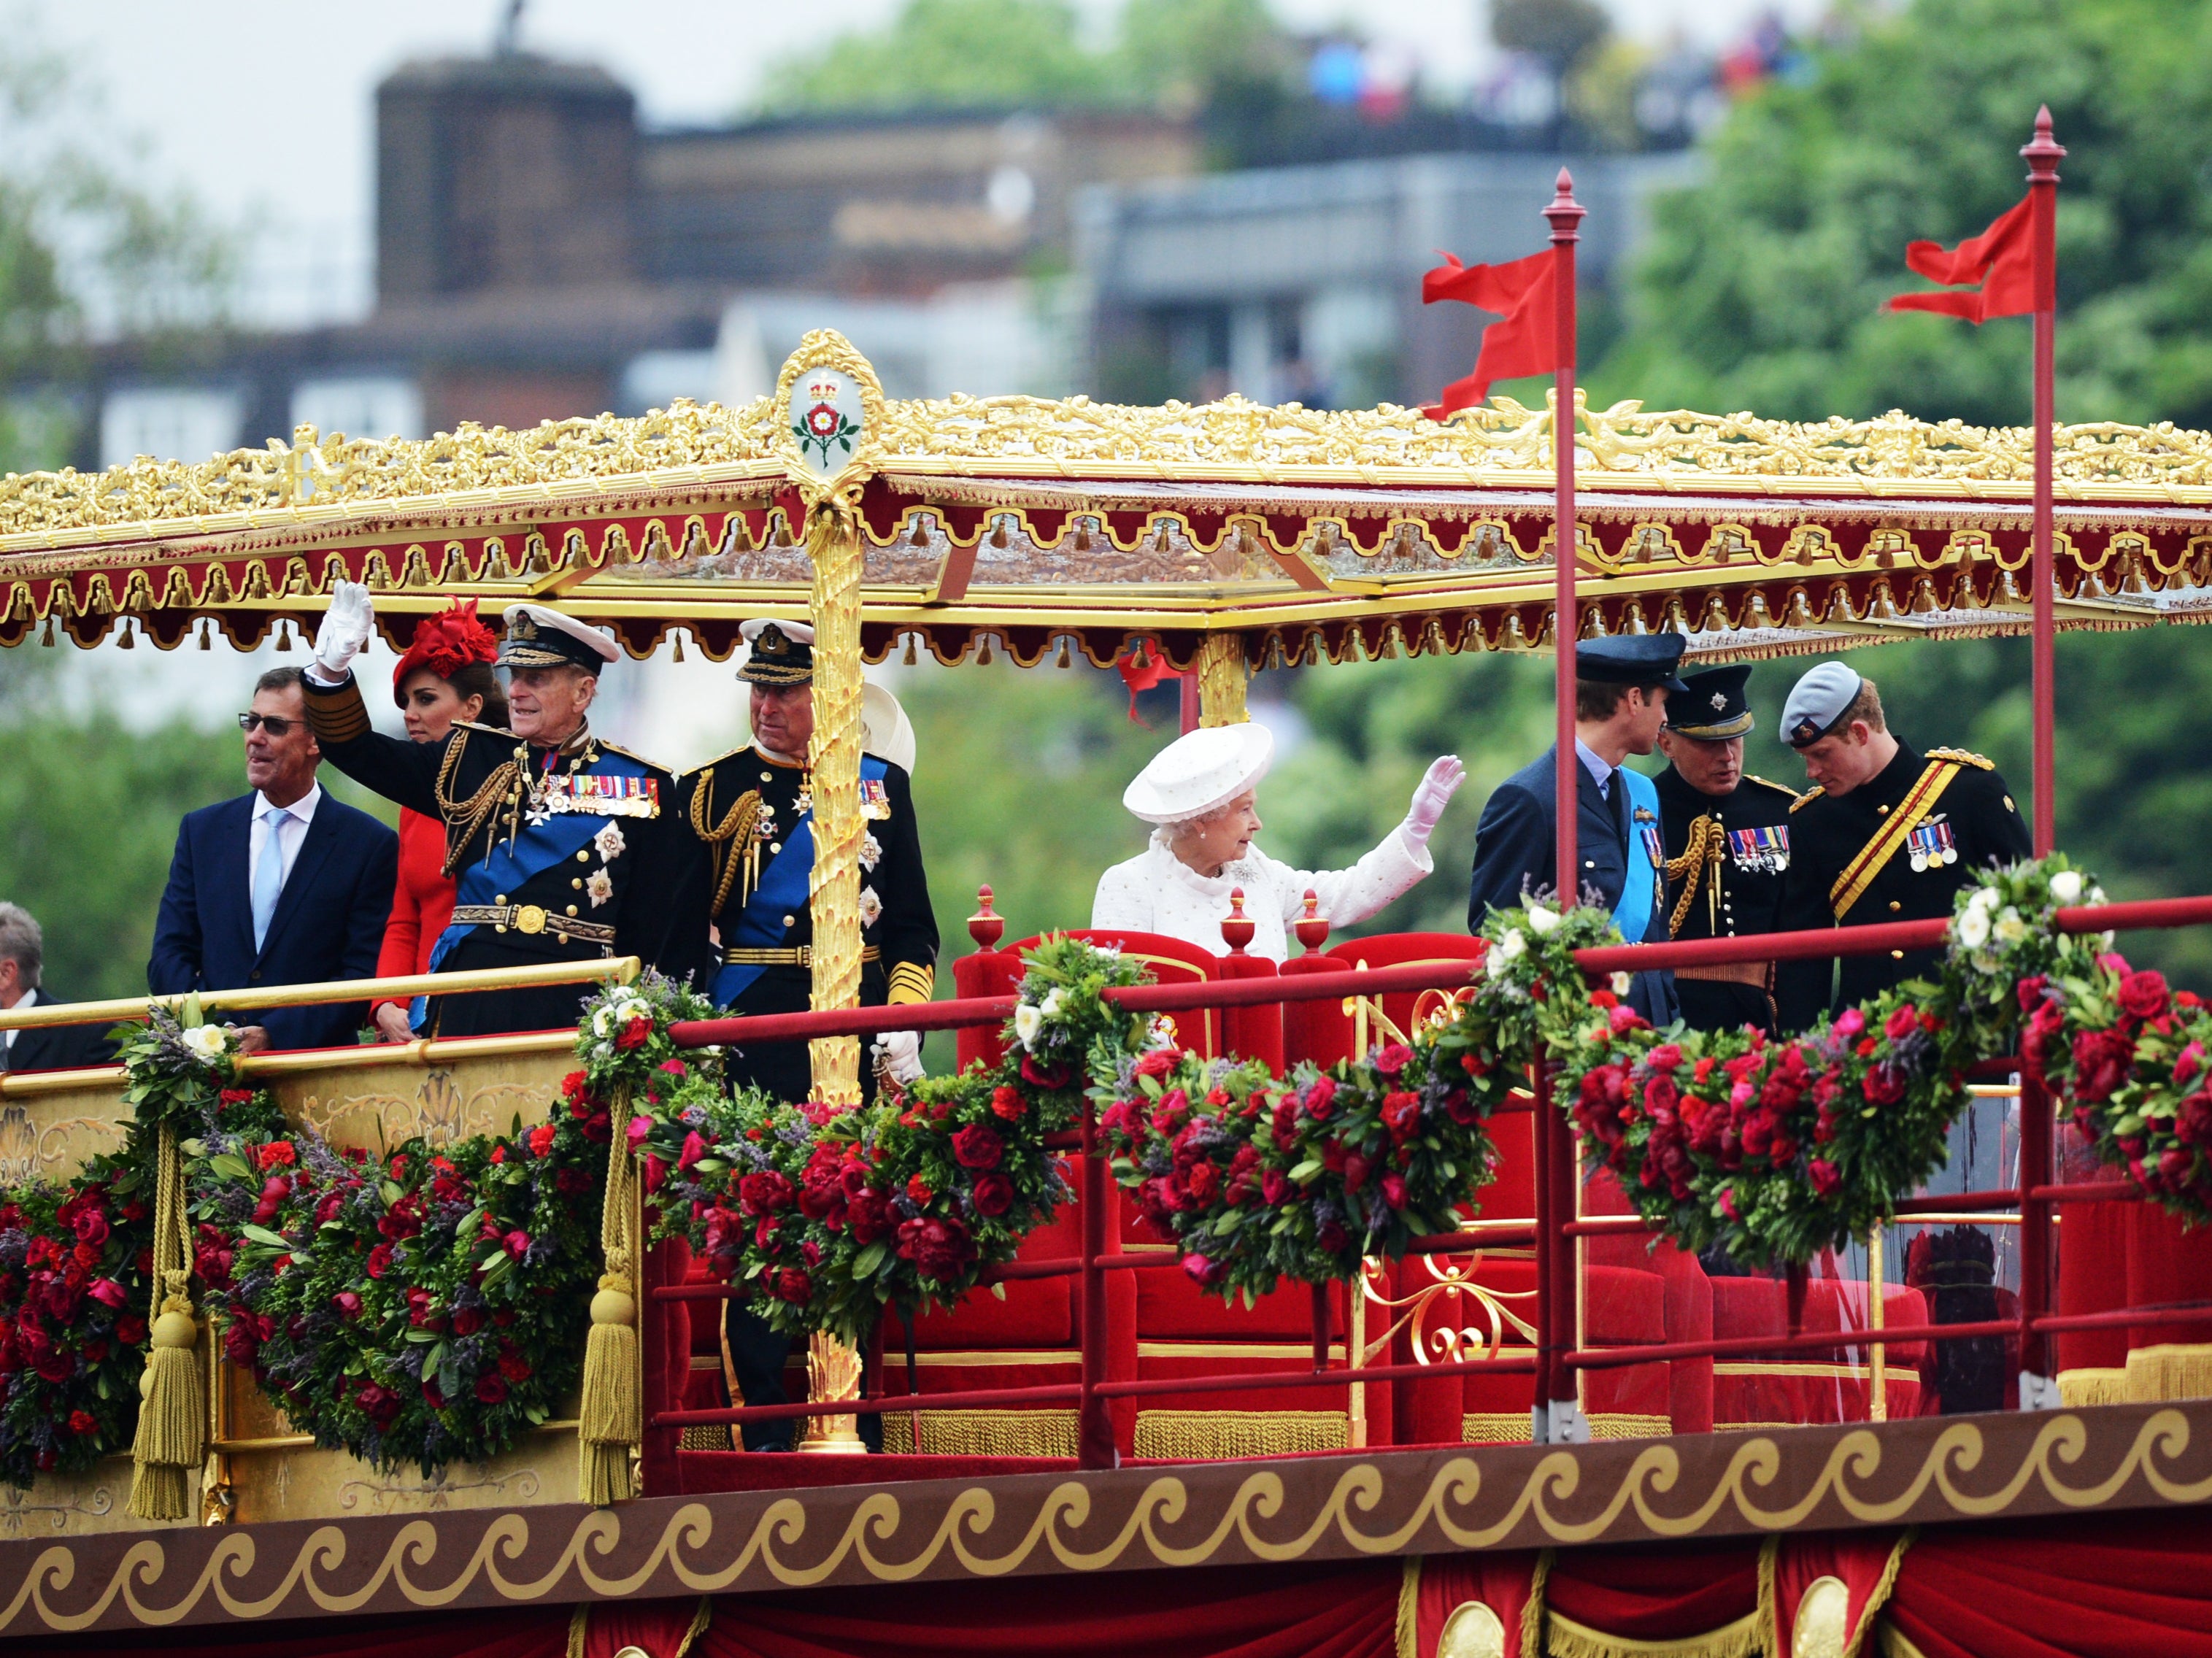 Members of the British royal family (3rdL-R) Catherine, Duchess of Cambridge, Prince Philip, Duke of Edinburgh, Prince Charles, Prince of Wales, Britain's Queen Elizabeth II, Prince William and Prince Harry stand aboard the royal barge 'Spirit of Chartwell' during the Thames Diamond Jubilee Pageant on the River Thame